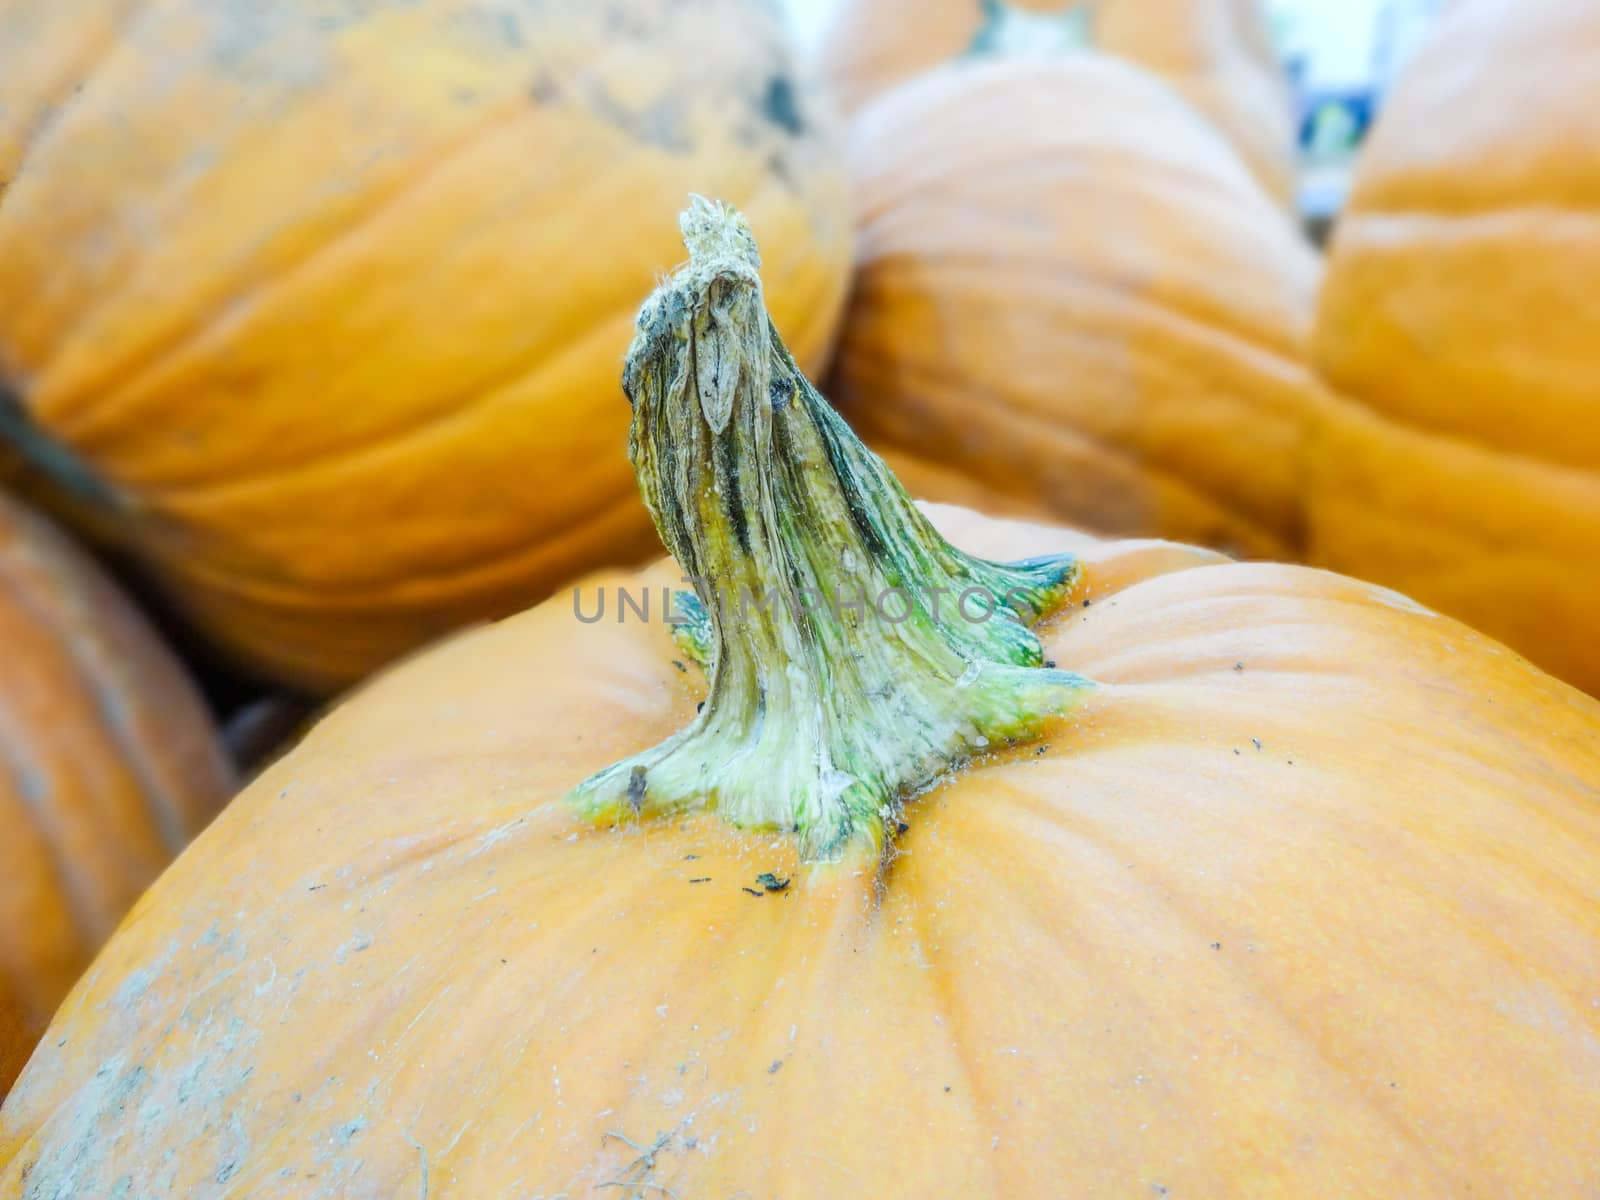 harvested pumpkins in store for sale by digidreamgrafix